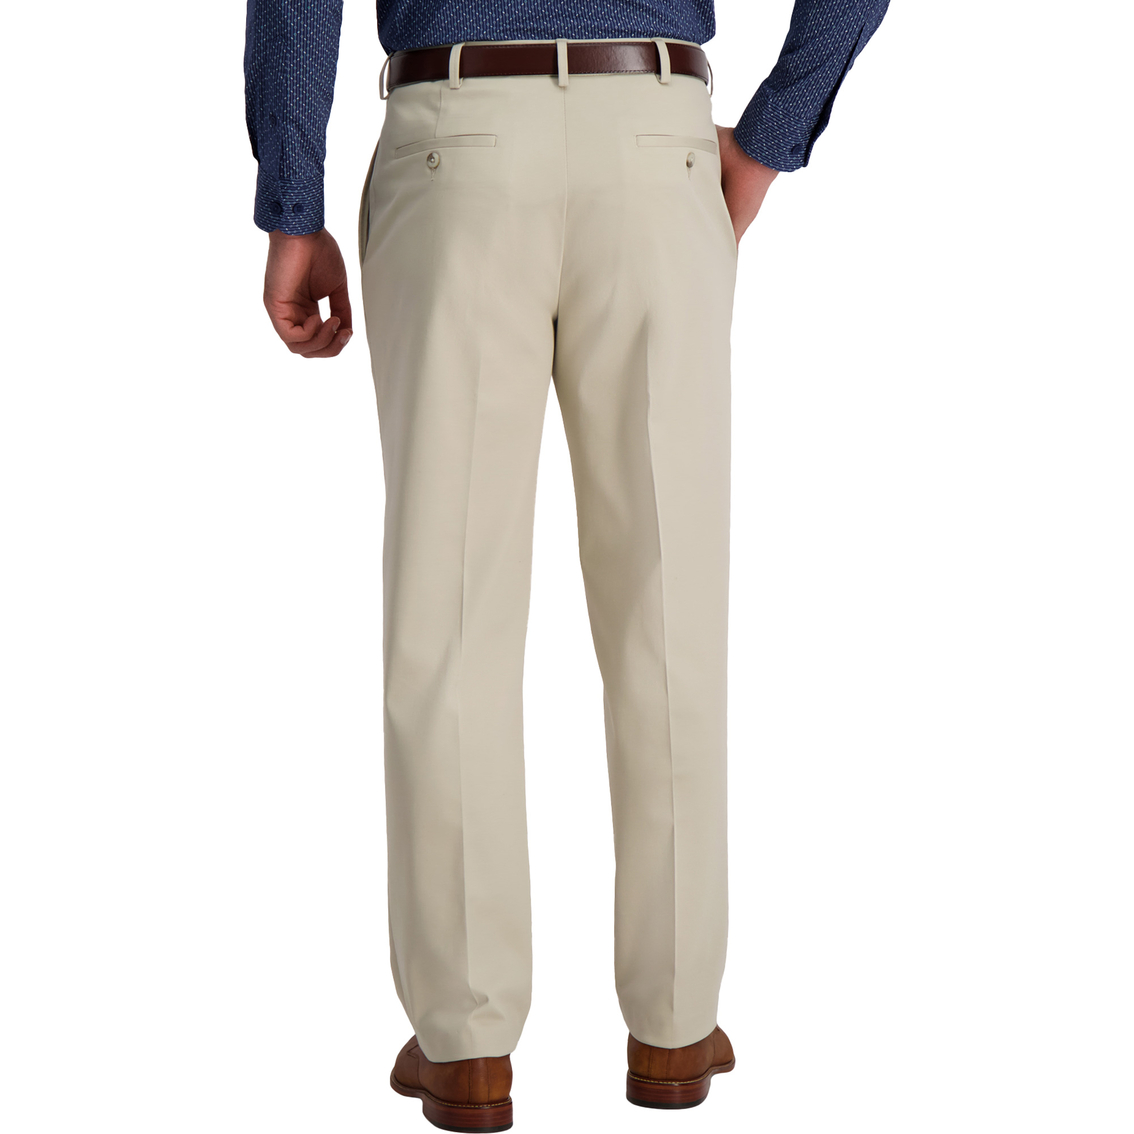 Haggar Iron Free Khaki Classic Fit Pleat Front Hidden Expandable Waistband Pants - Image 2 of 4